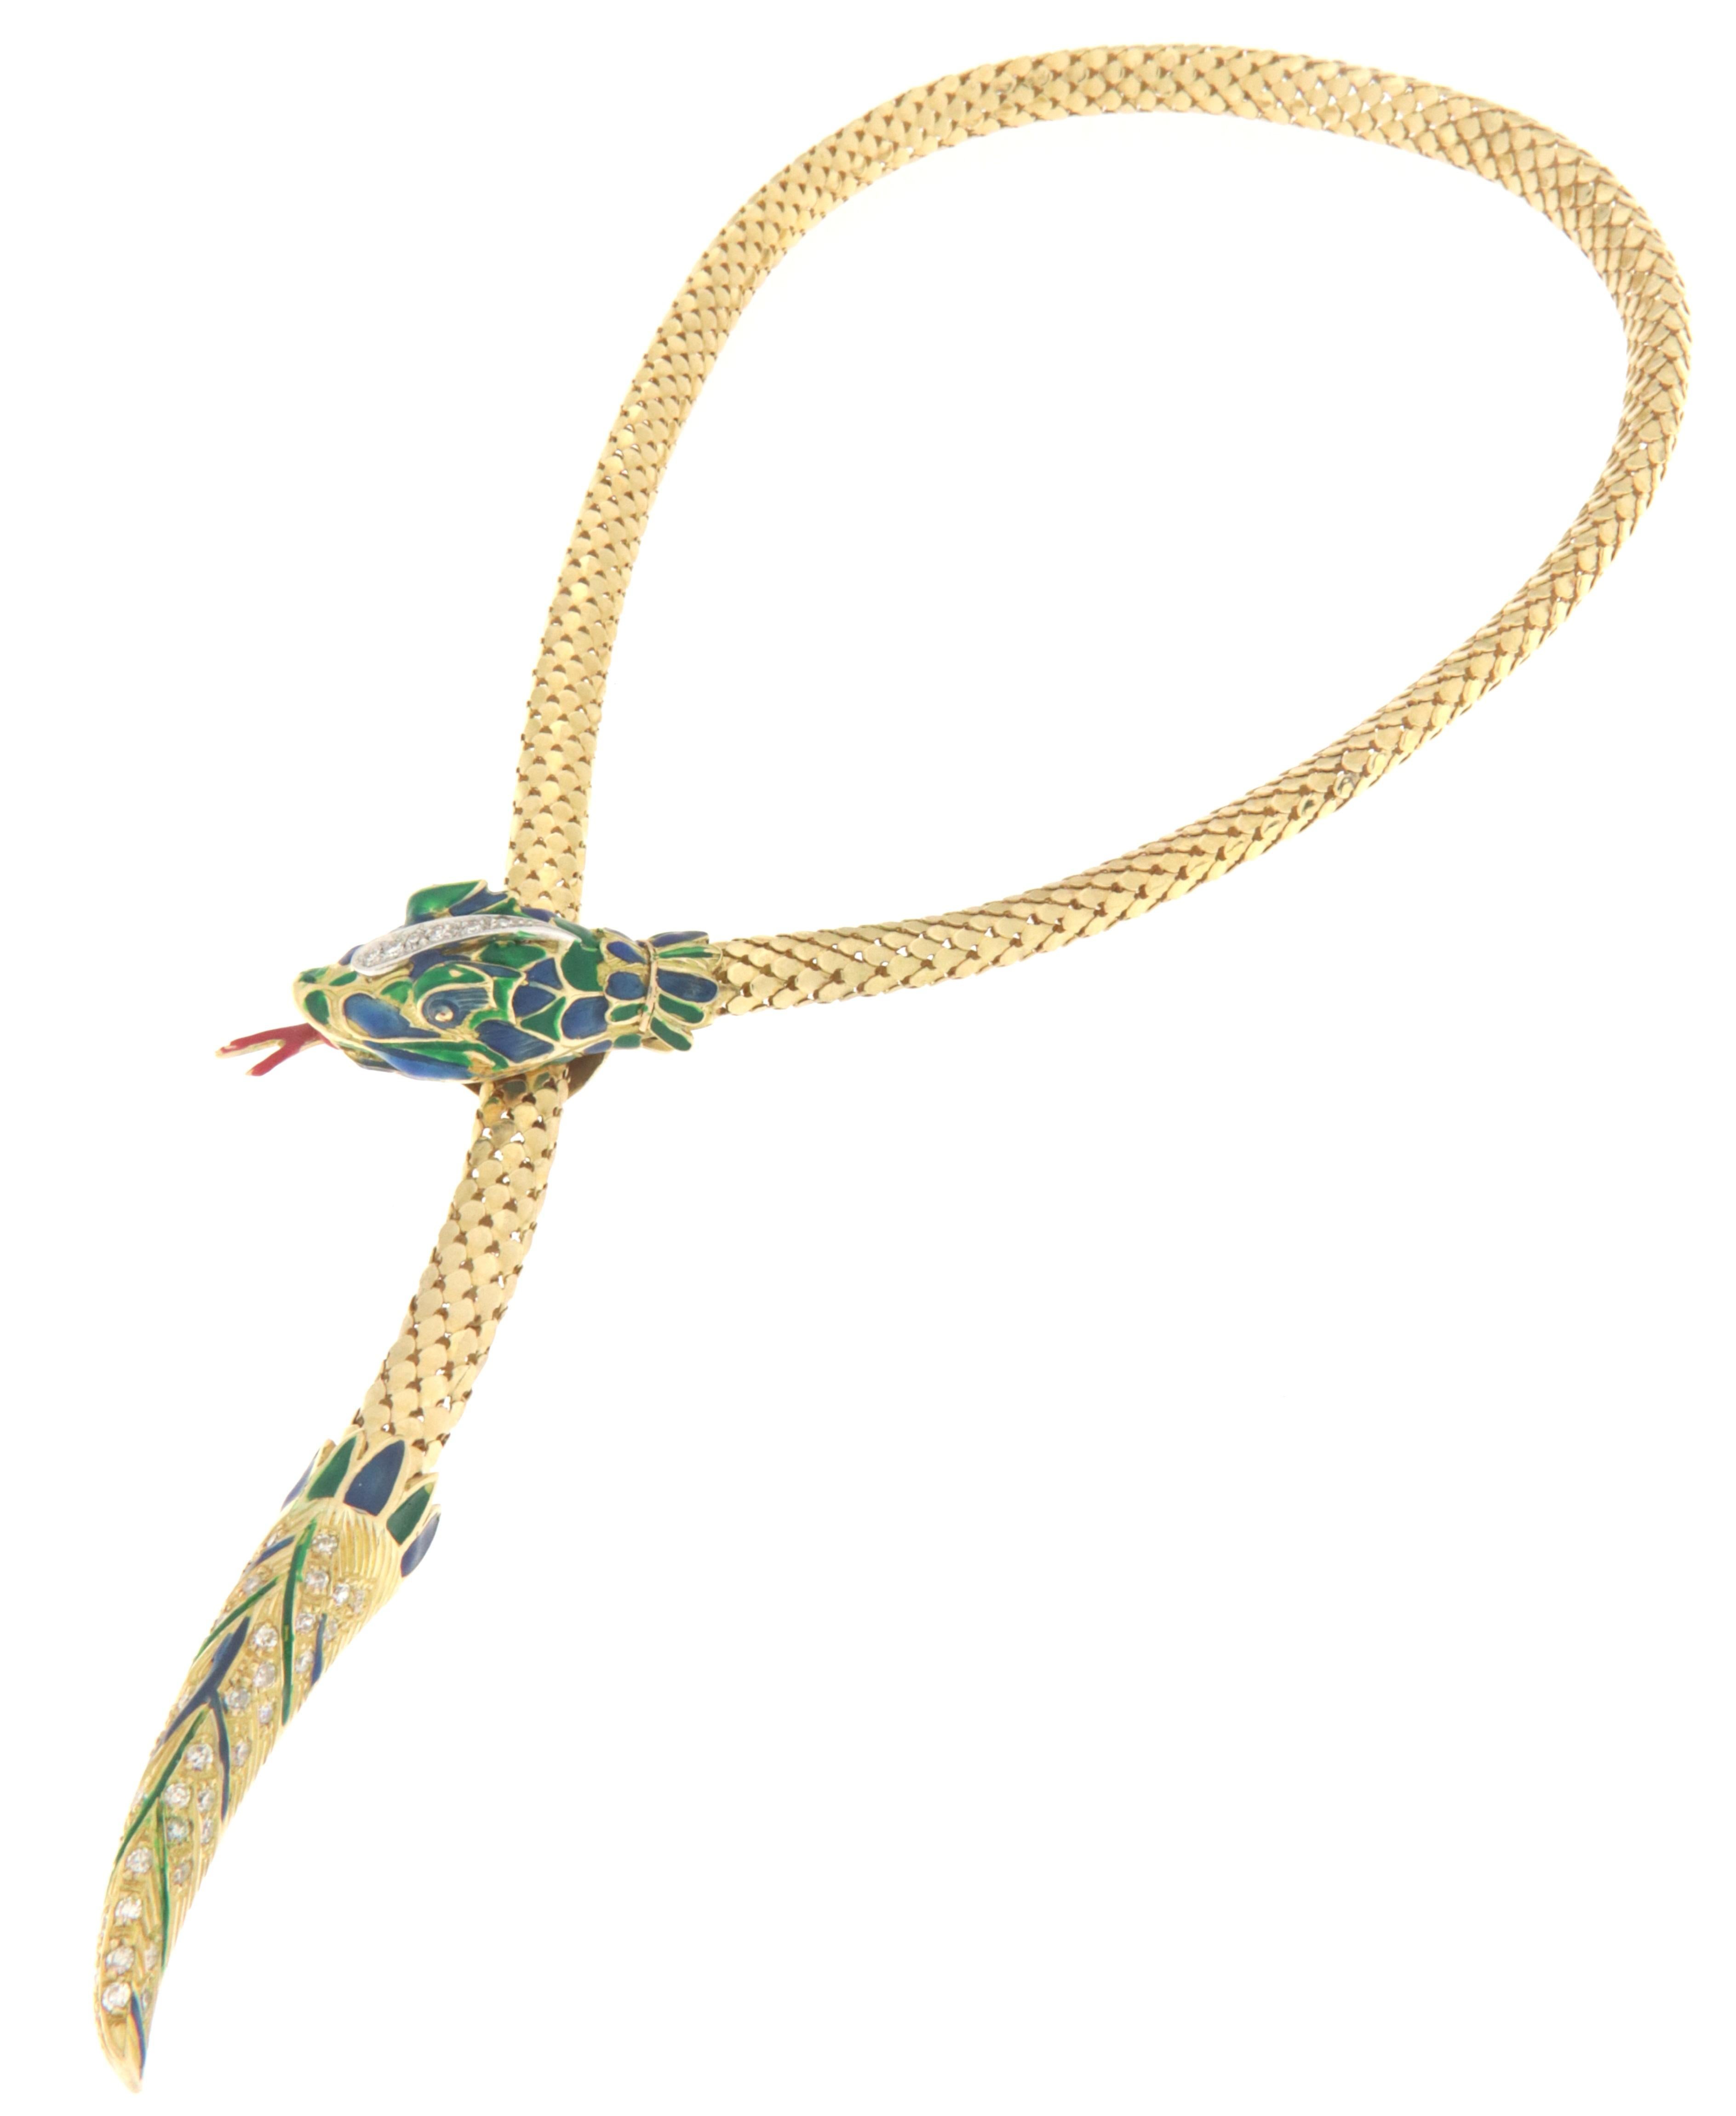 Beautiful snake necklace in 18 karat yellow gold. Handmade by craftsmen assembled with diamonds and green,blue enamel.

Diamonds weight 1.21 karat
Necklace total weight 65.70 grams
Necklace open 52 cm (Length)